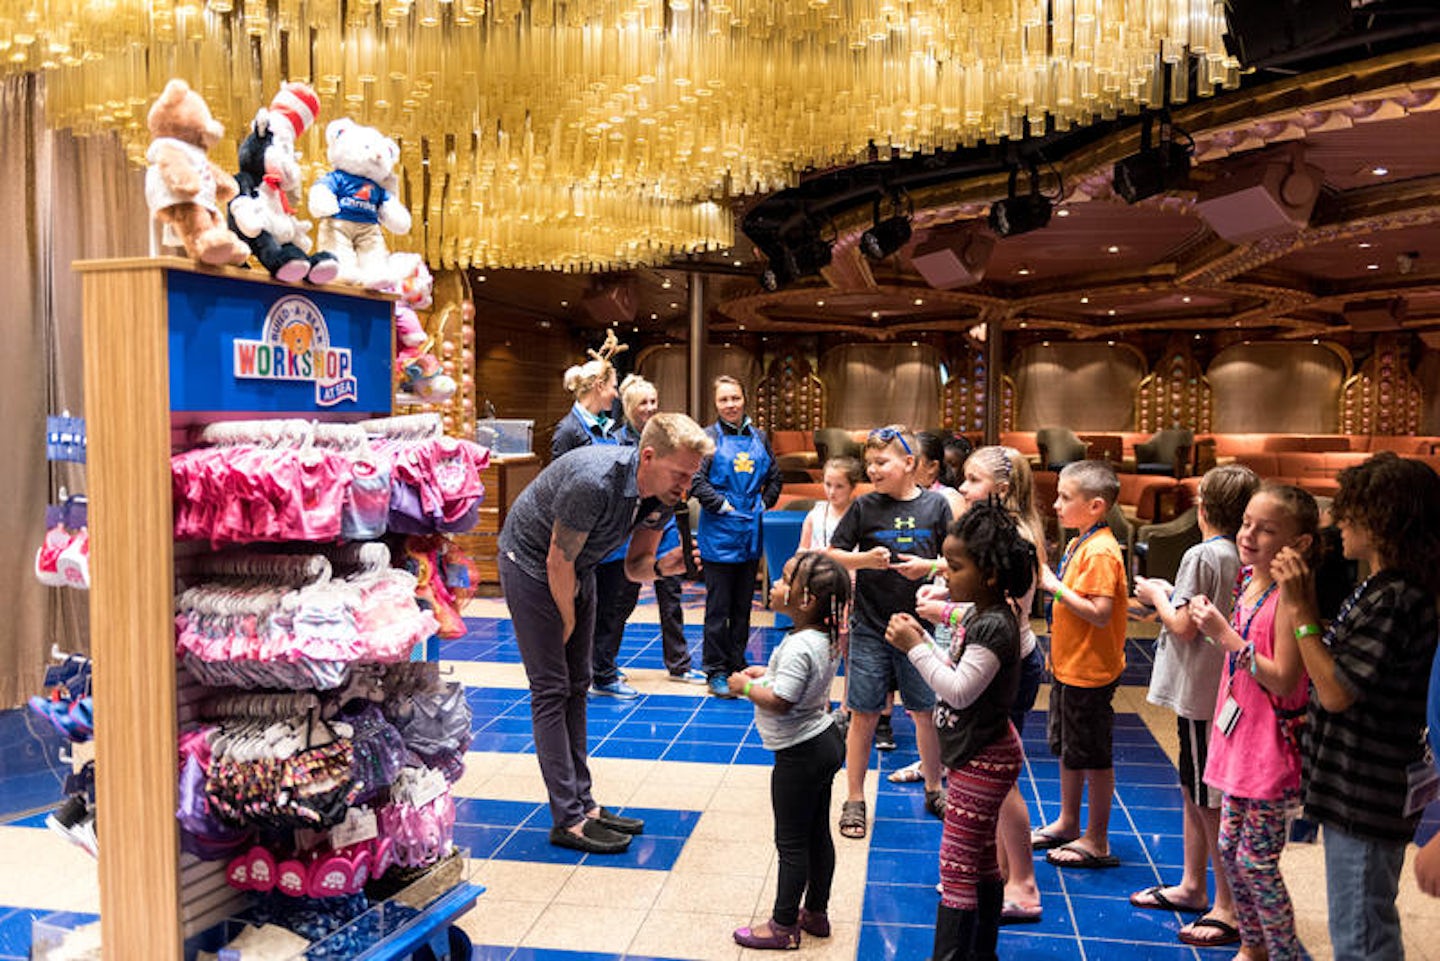 Build-A-Bear Workshop at Sea in the Cole Porter Aft Lounge on Carnival Elation